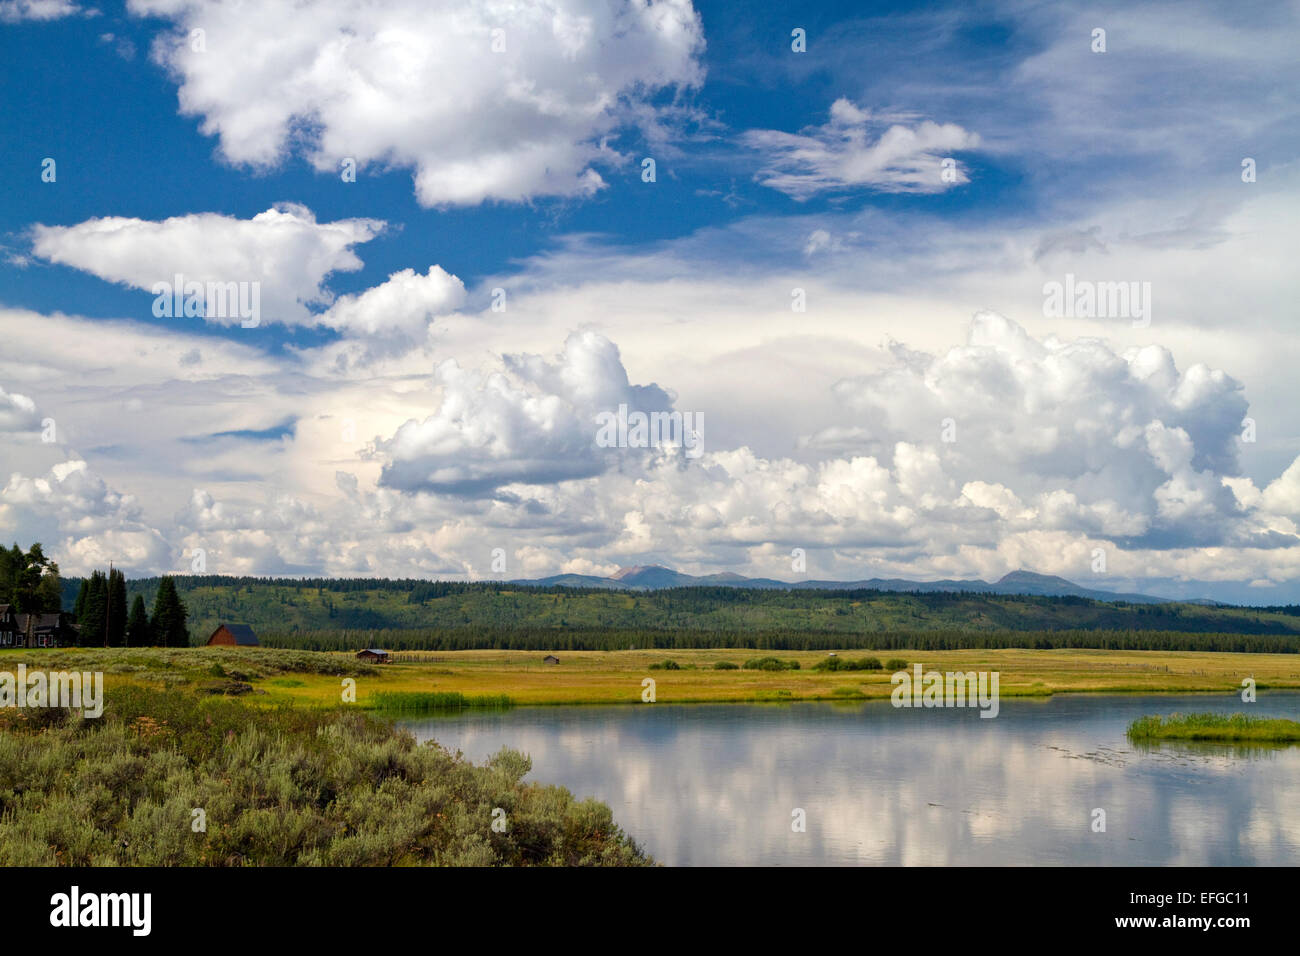 Harriman State Park located in the Greater Yellowstone Ecosystem in Eastern Idaho, USA. Stock Photo